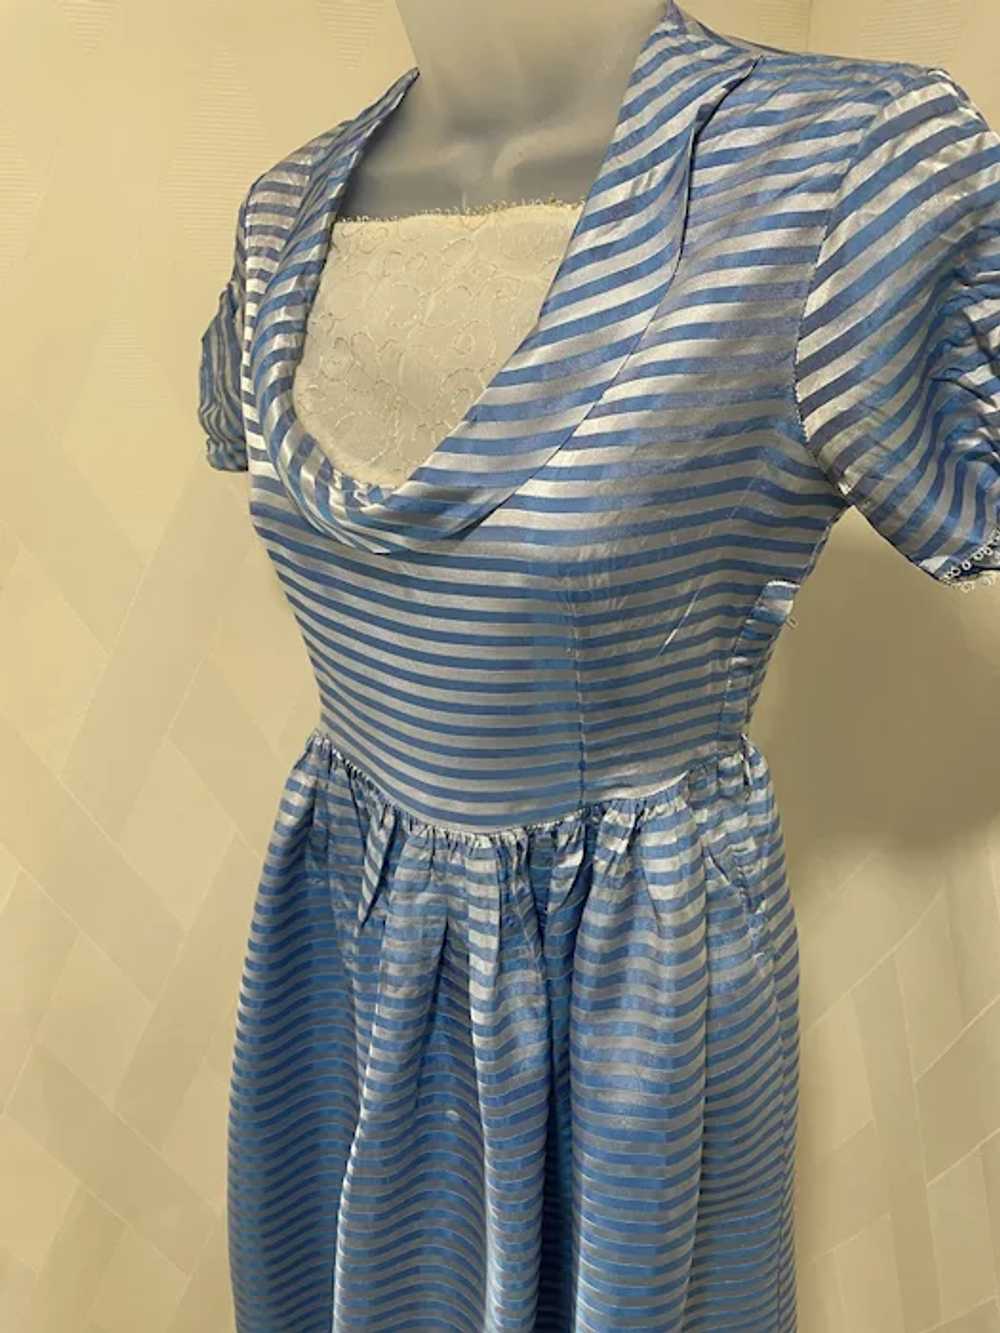 Vintage 1950s Blue and Silver Striped Dress - image 2